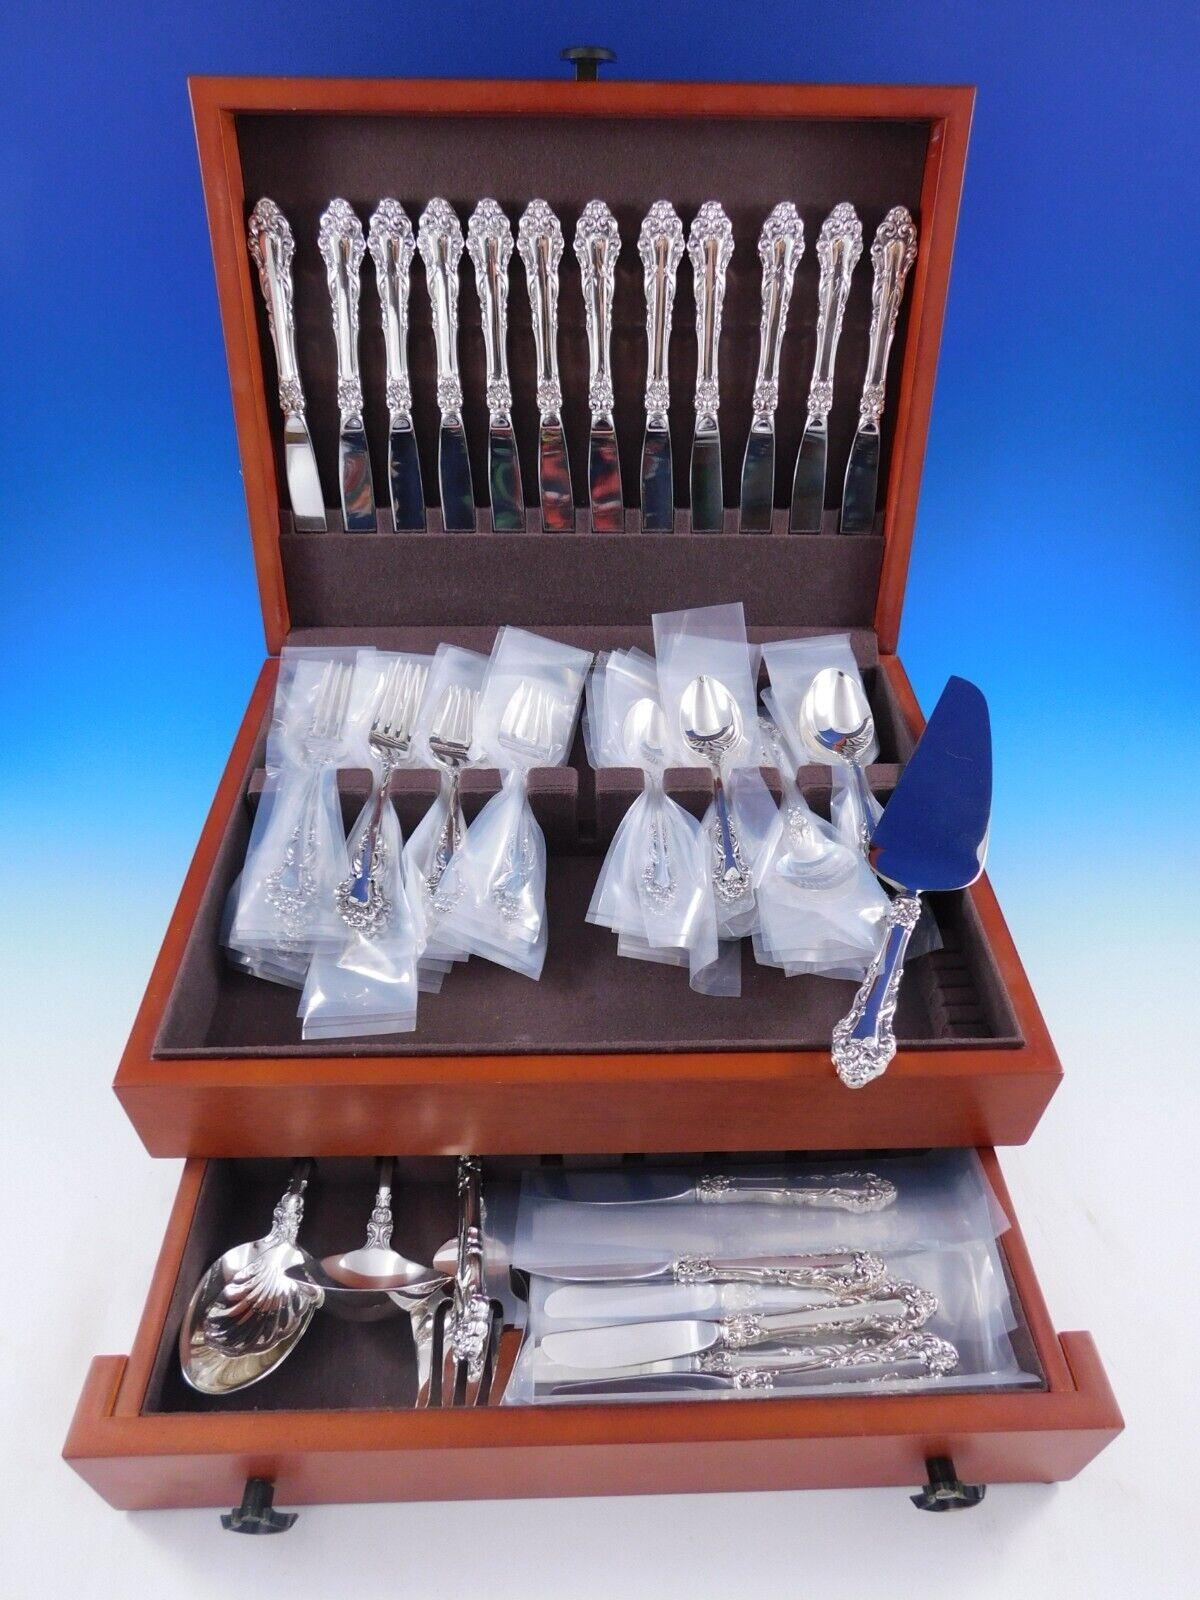 Grande Renaissance by Reed and Barton Sterling Silver Flatware Set - 79 pieces. This set includes:

12 Regular Knives, 9